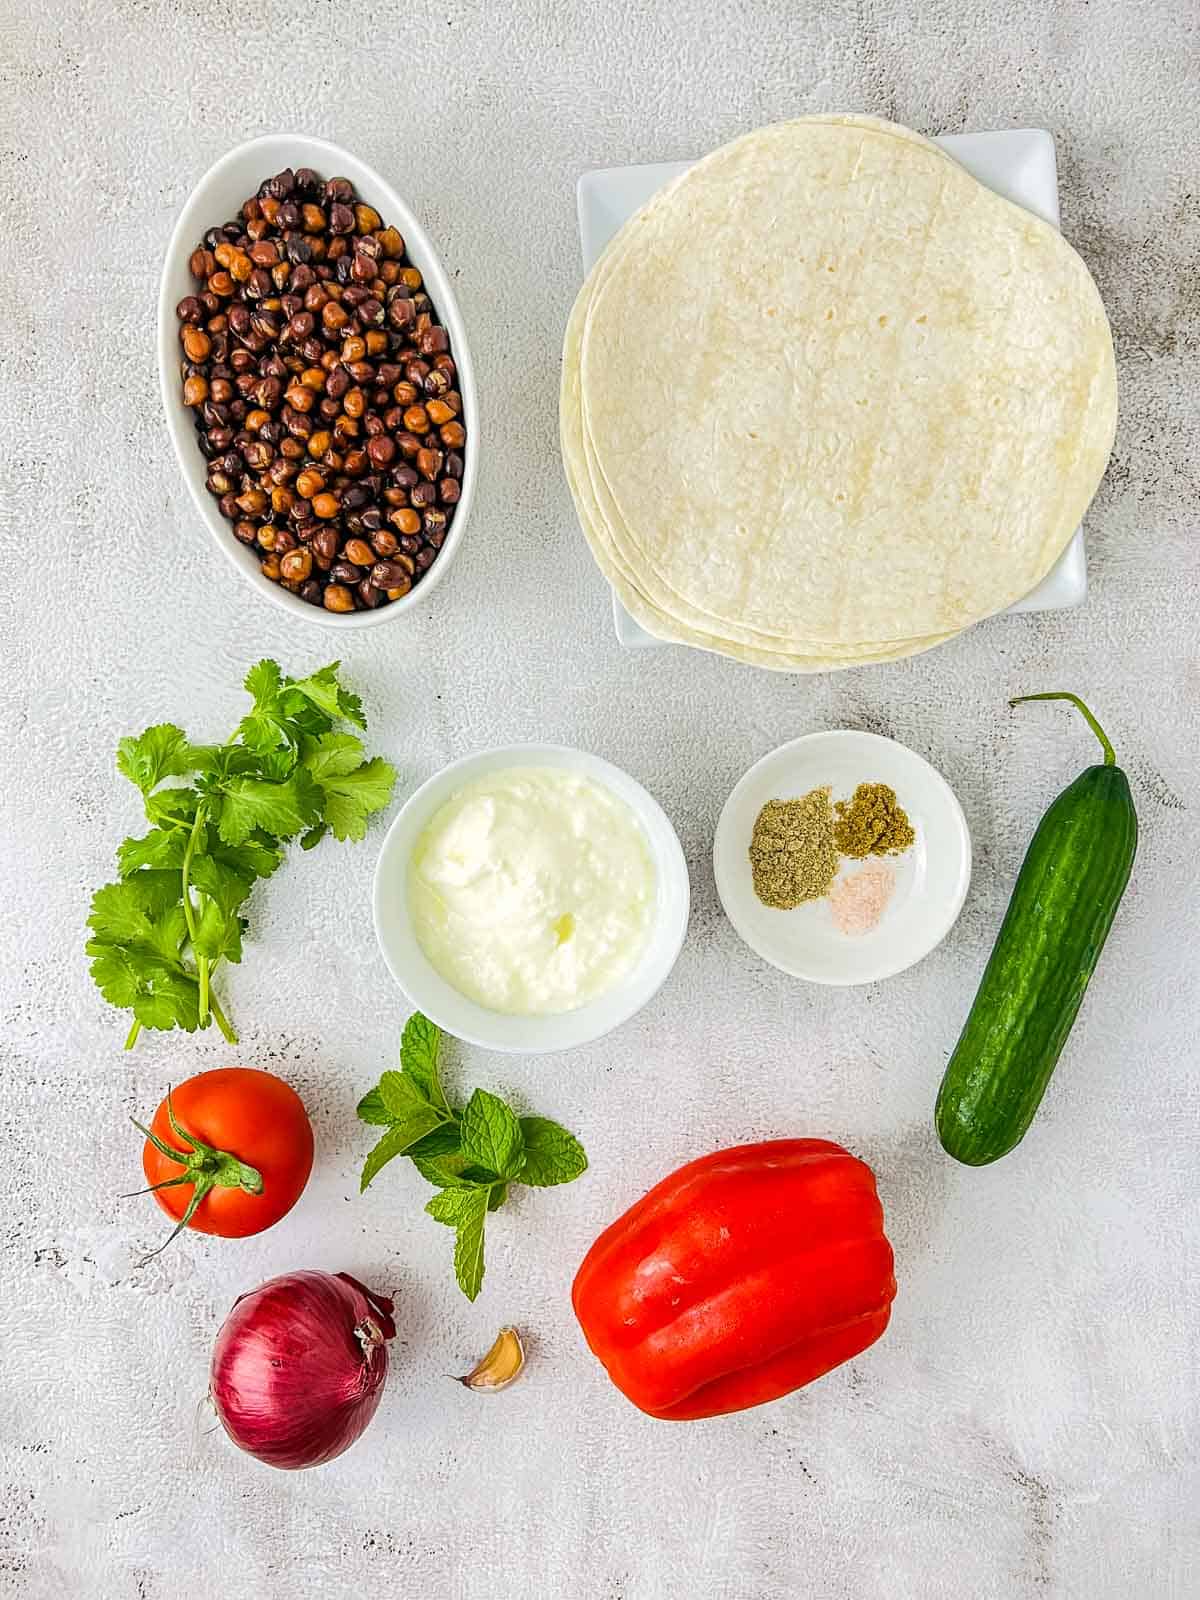 Ingredients to make black chickpea wraps placed on a white surface.